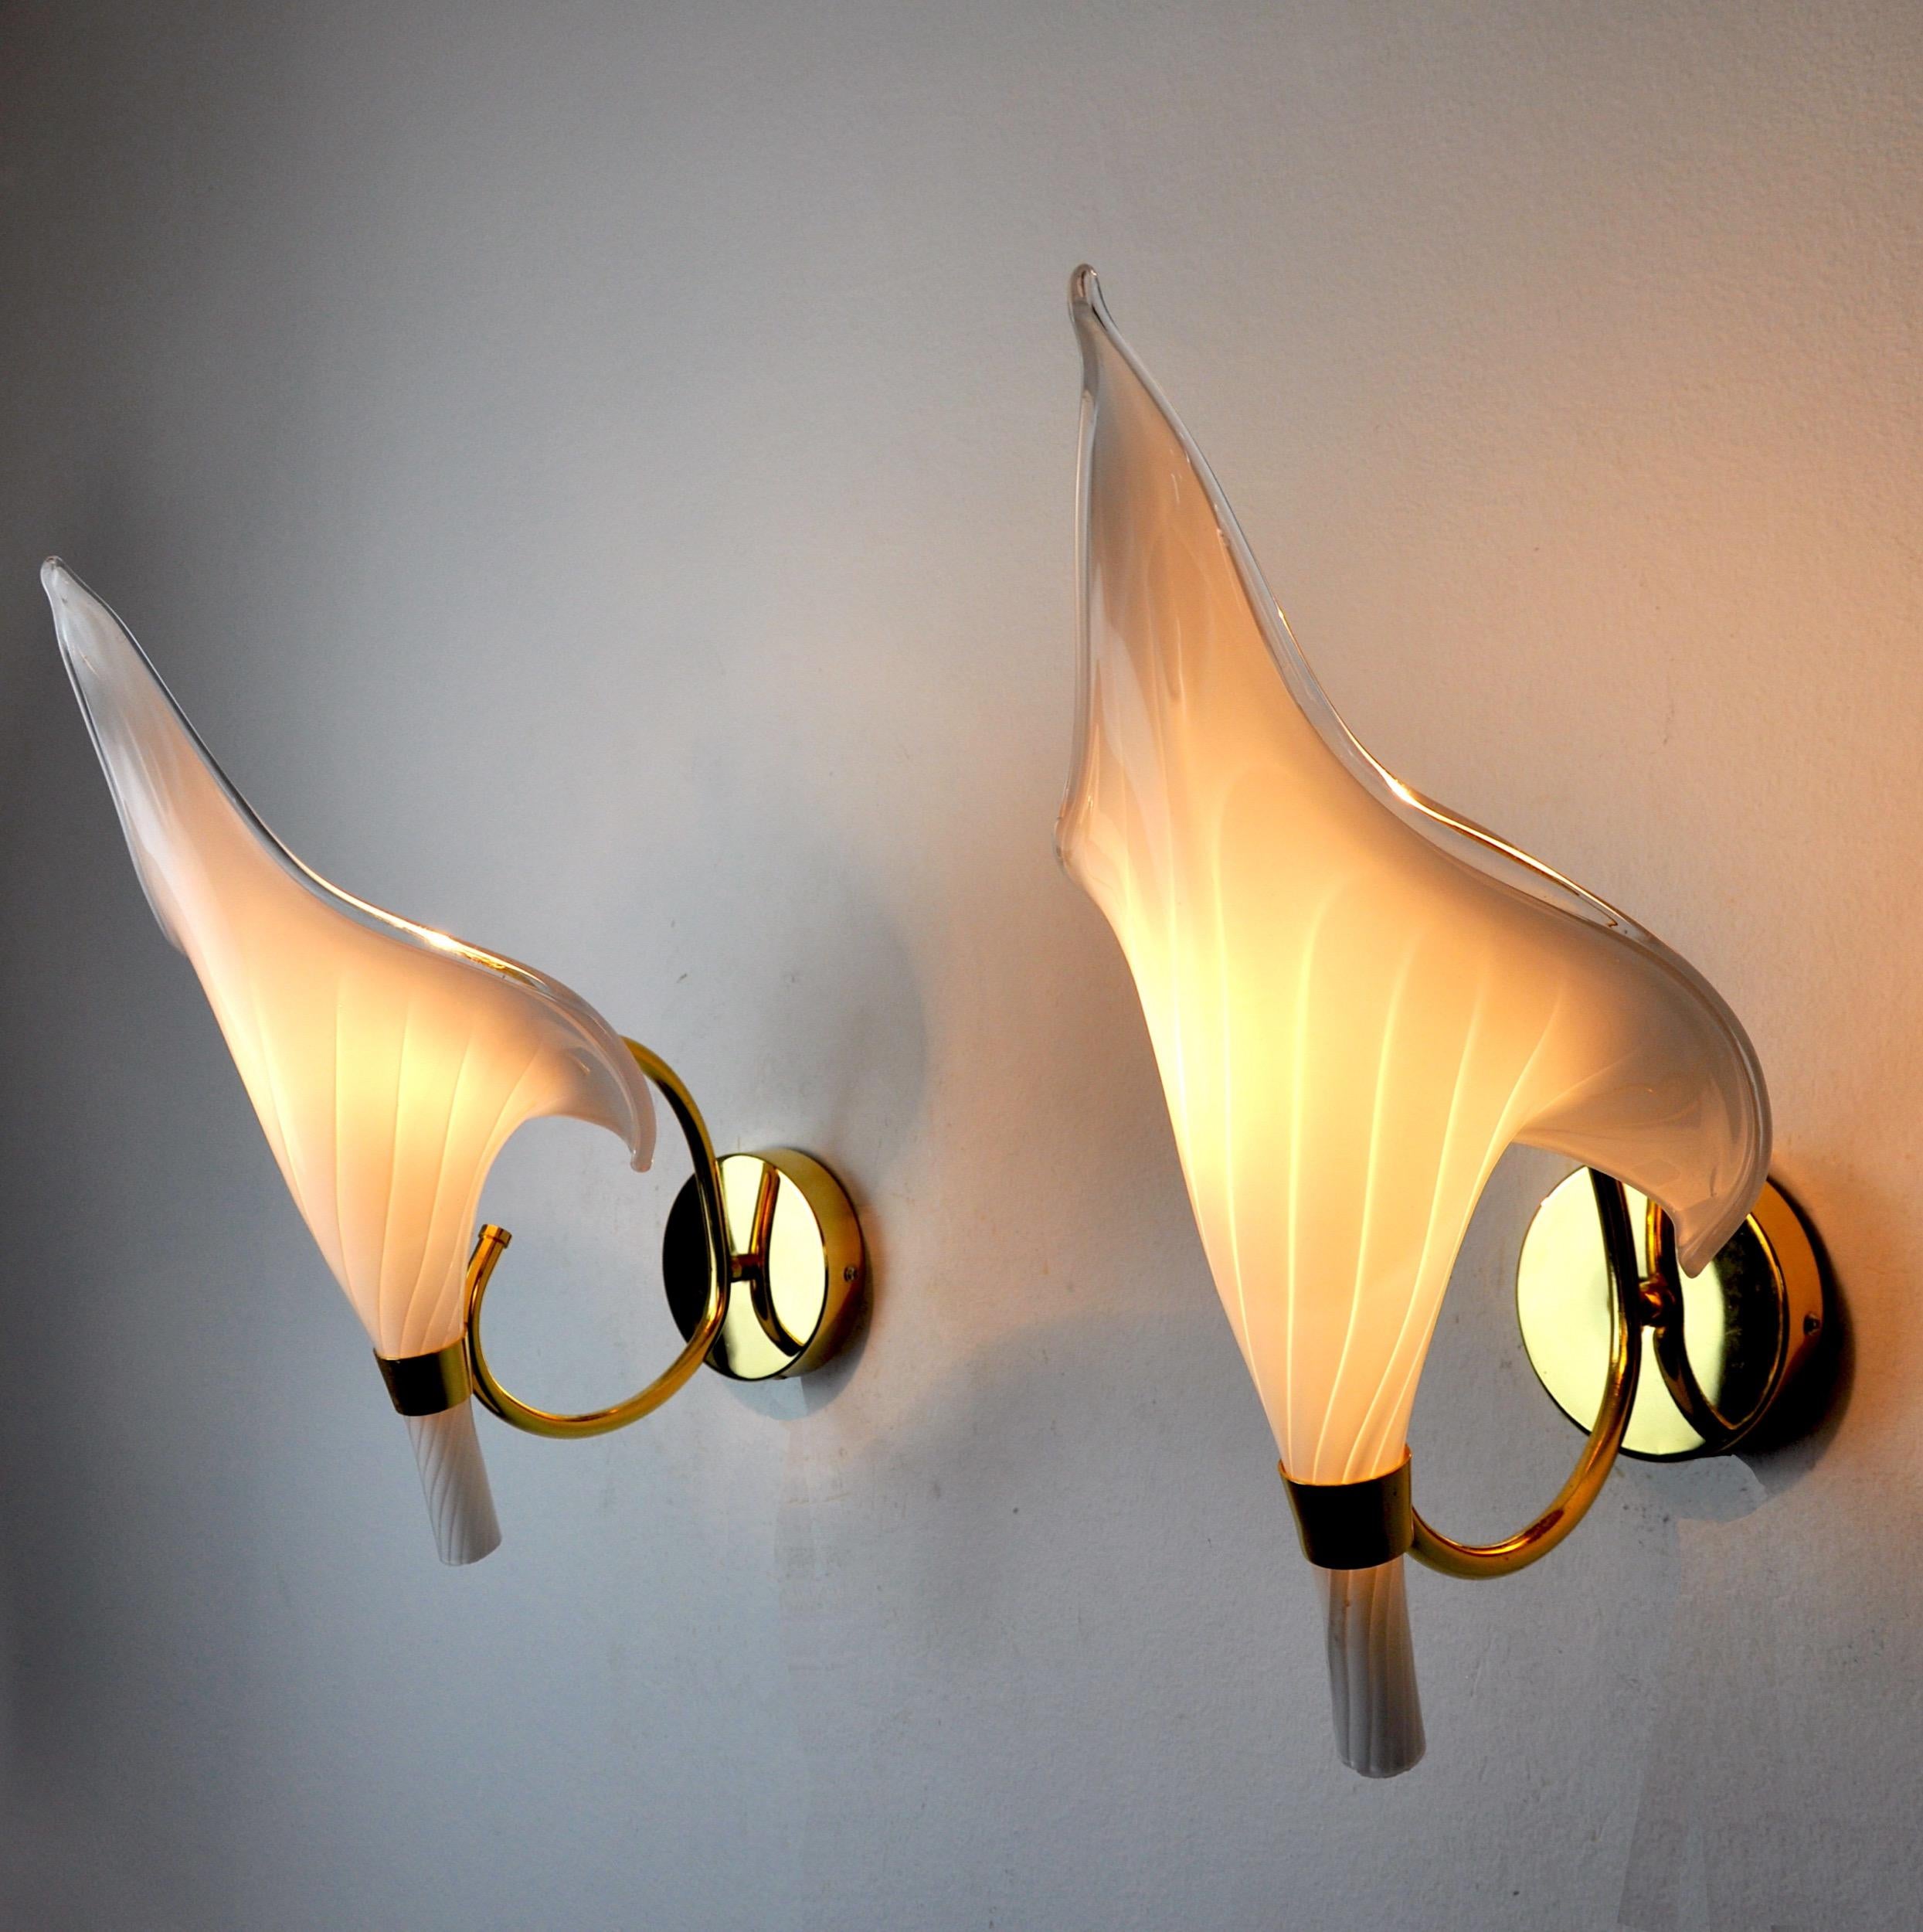 Superb and rare pair of calla lily wall lamps in Murano glass, designed and produced in Italy in the 1970s.
Gilded metal structure composed of a white cut crystal in the shape of a fleur-de-lys, made by Italian master glassmakers.
Rare design object